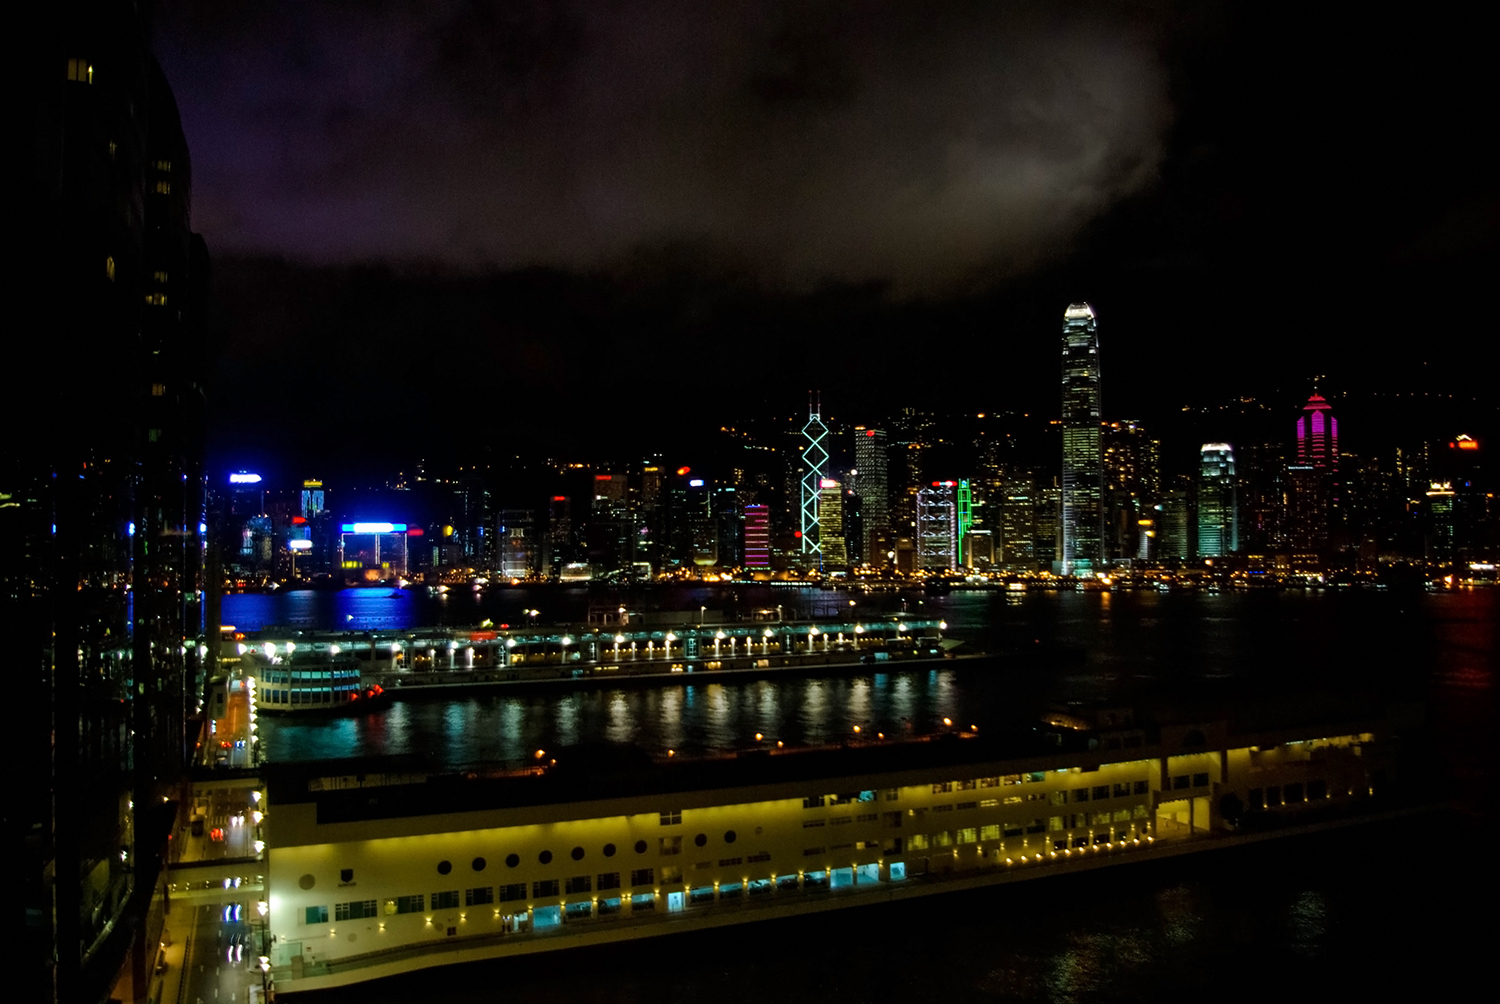 <p>Hong Kong has the world's best skyline (and as a former Chicagoan and New Yorker I can say that). By night, the city's standout skyscrapers illuminate in a choreography of colour while thousands of flats add a galaxy of twinkling lights. Fast moving weather patterns and the faint outline of the Peak further enhance the scene. Here's just some of that mesmerising vista of Central shot from Kowloon.</p>